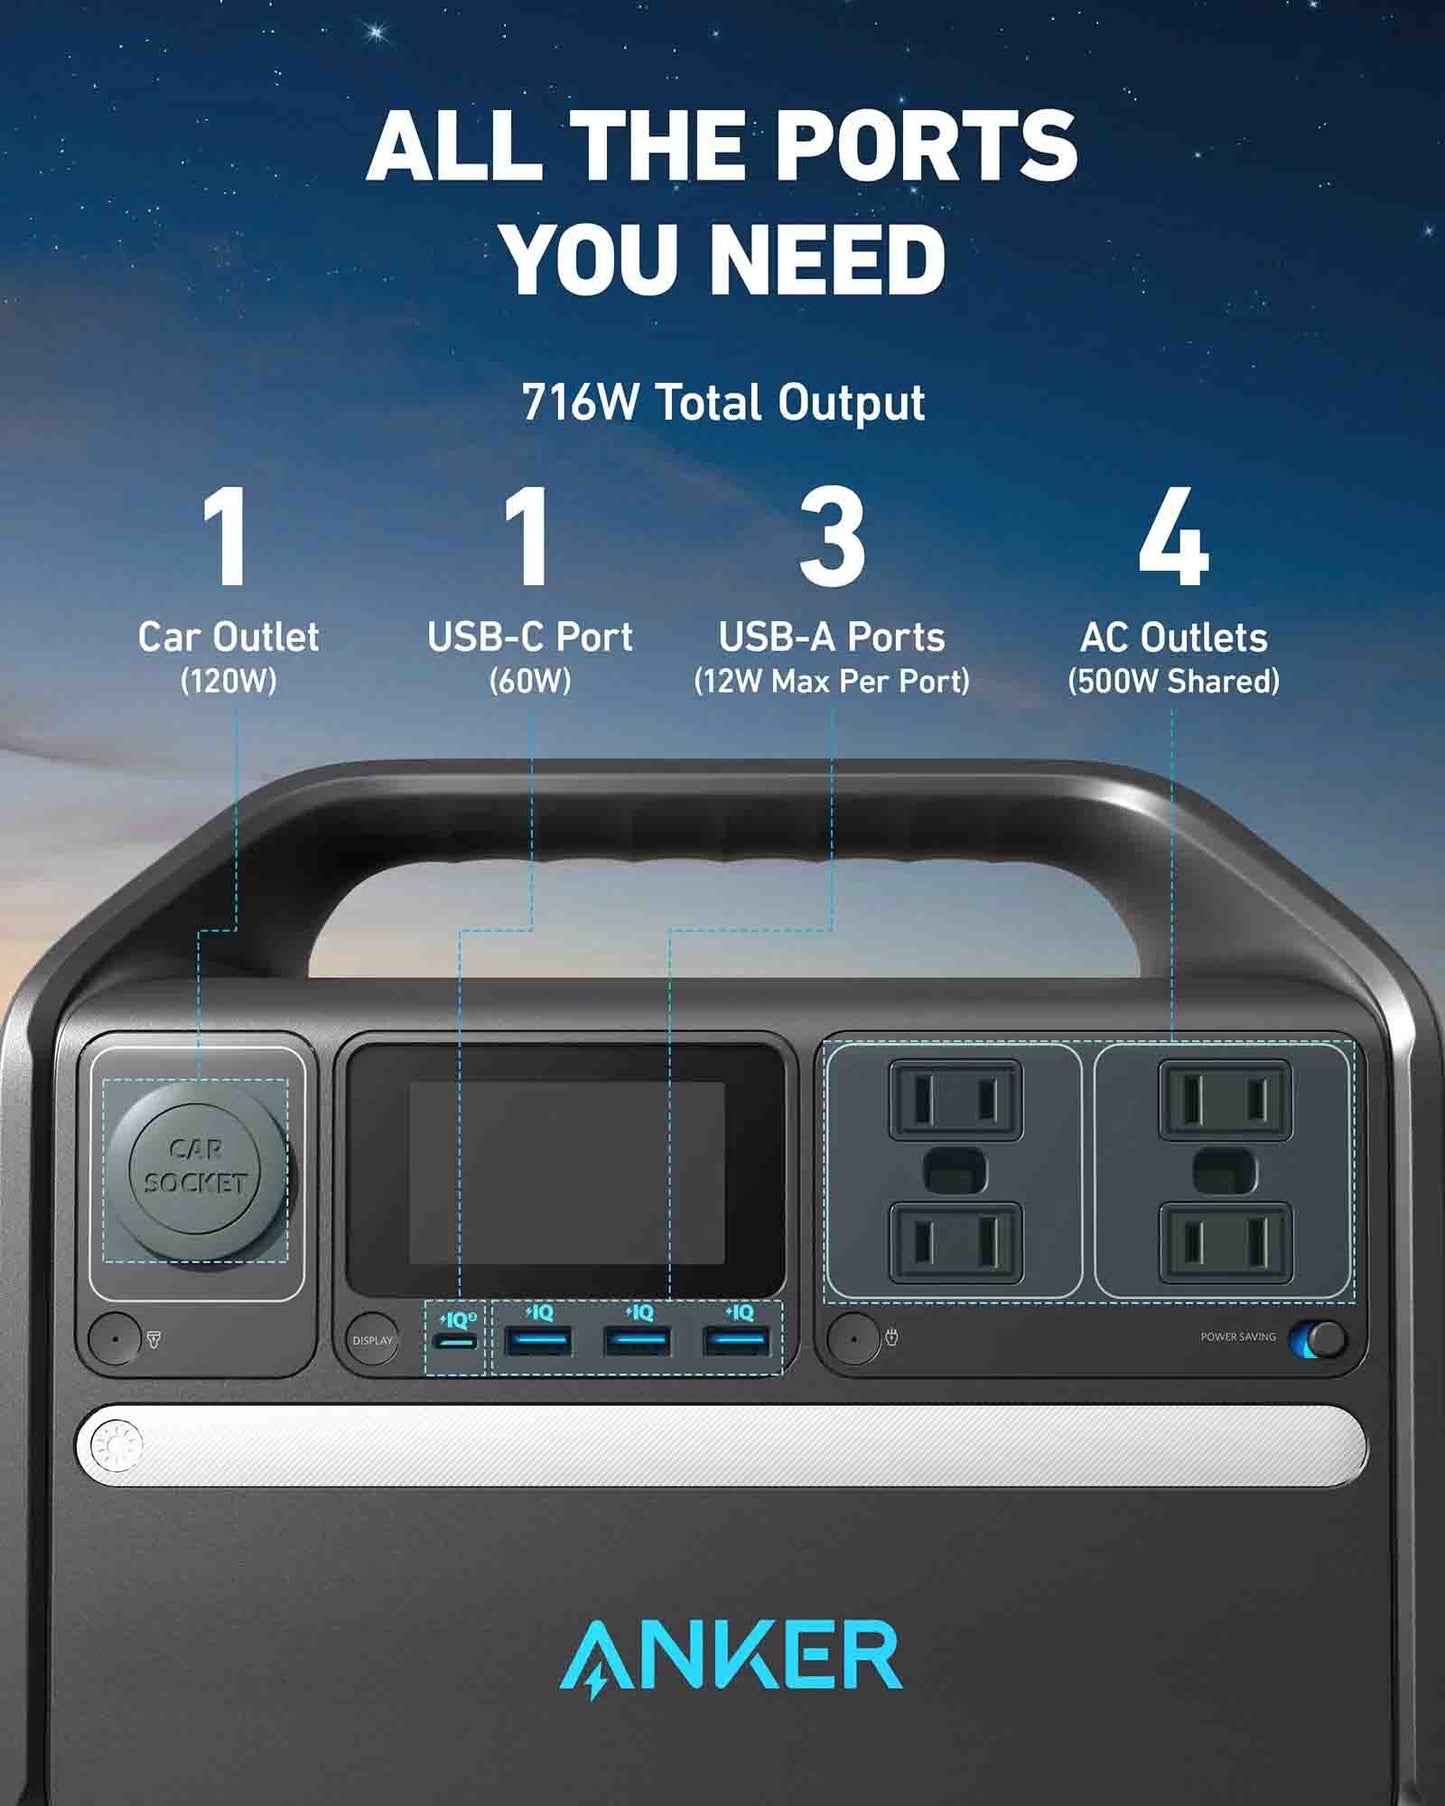 The Anker PowerHouse 535 Has All The Ports You Need - 4 AC Outlets, 3 USB-A Ports, 1 USB-C Port, And 1 Car Outlet